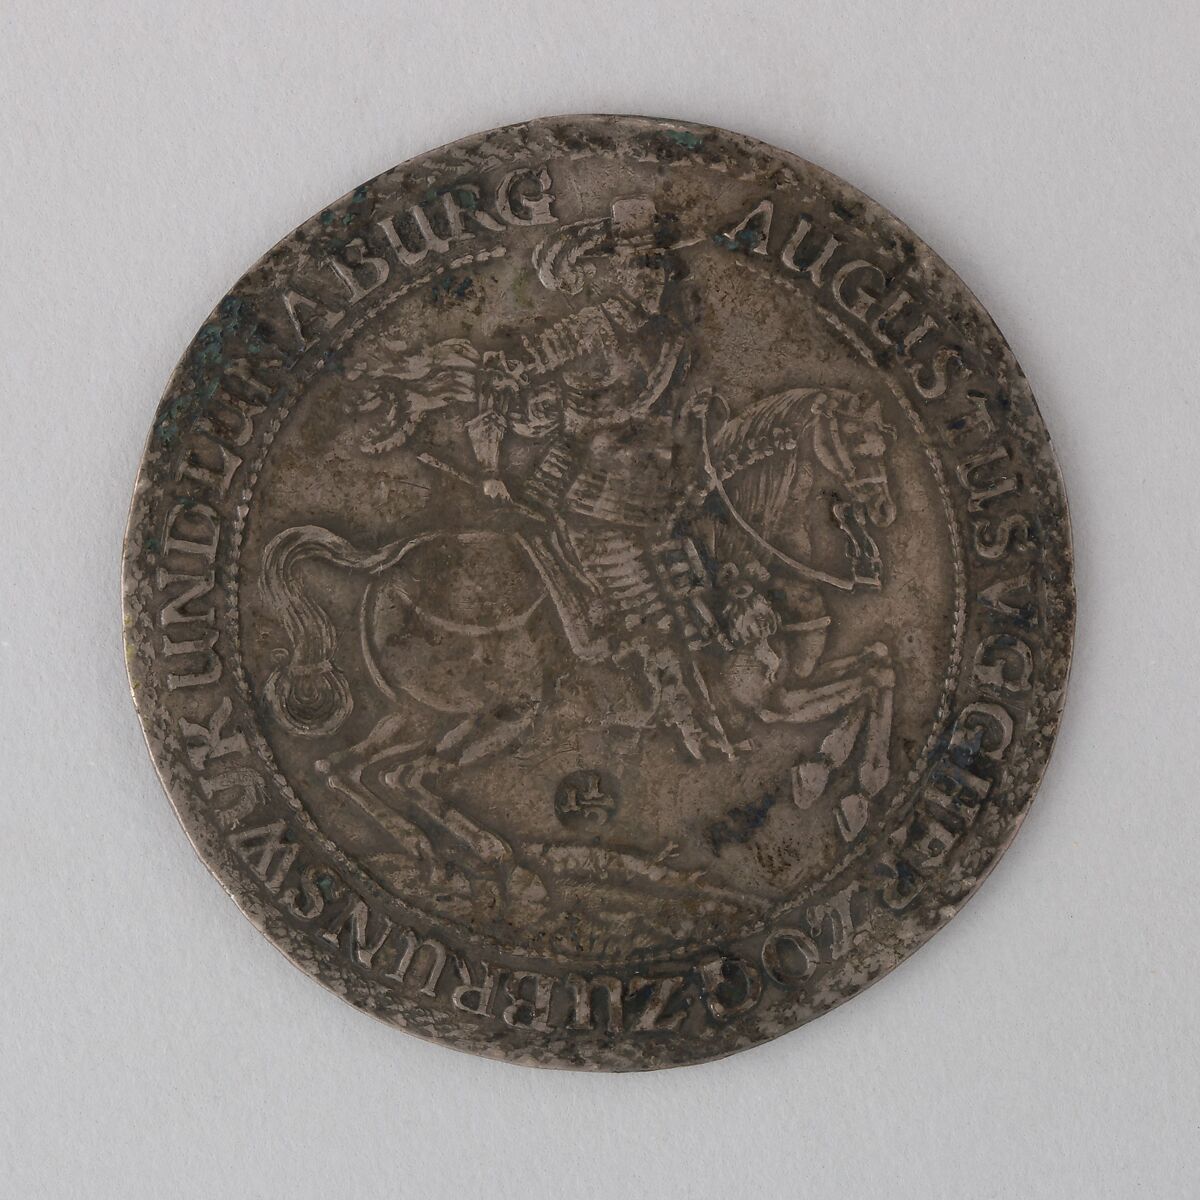 Coin (One and One-Half Thaler) Showing Augustus V, Duke of Brunswick-Luneburg, Silver, German 